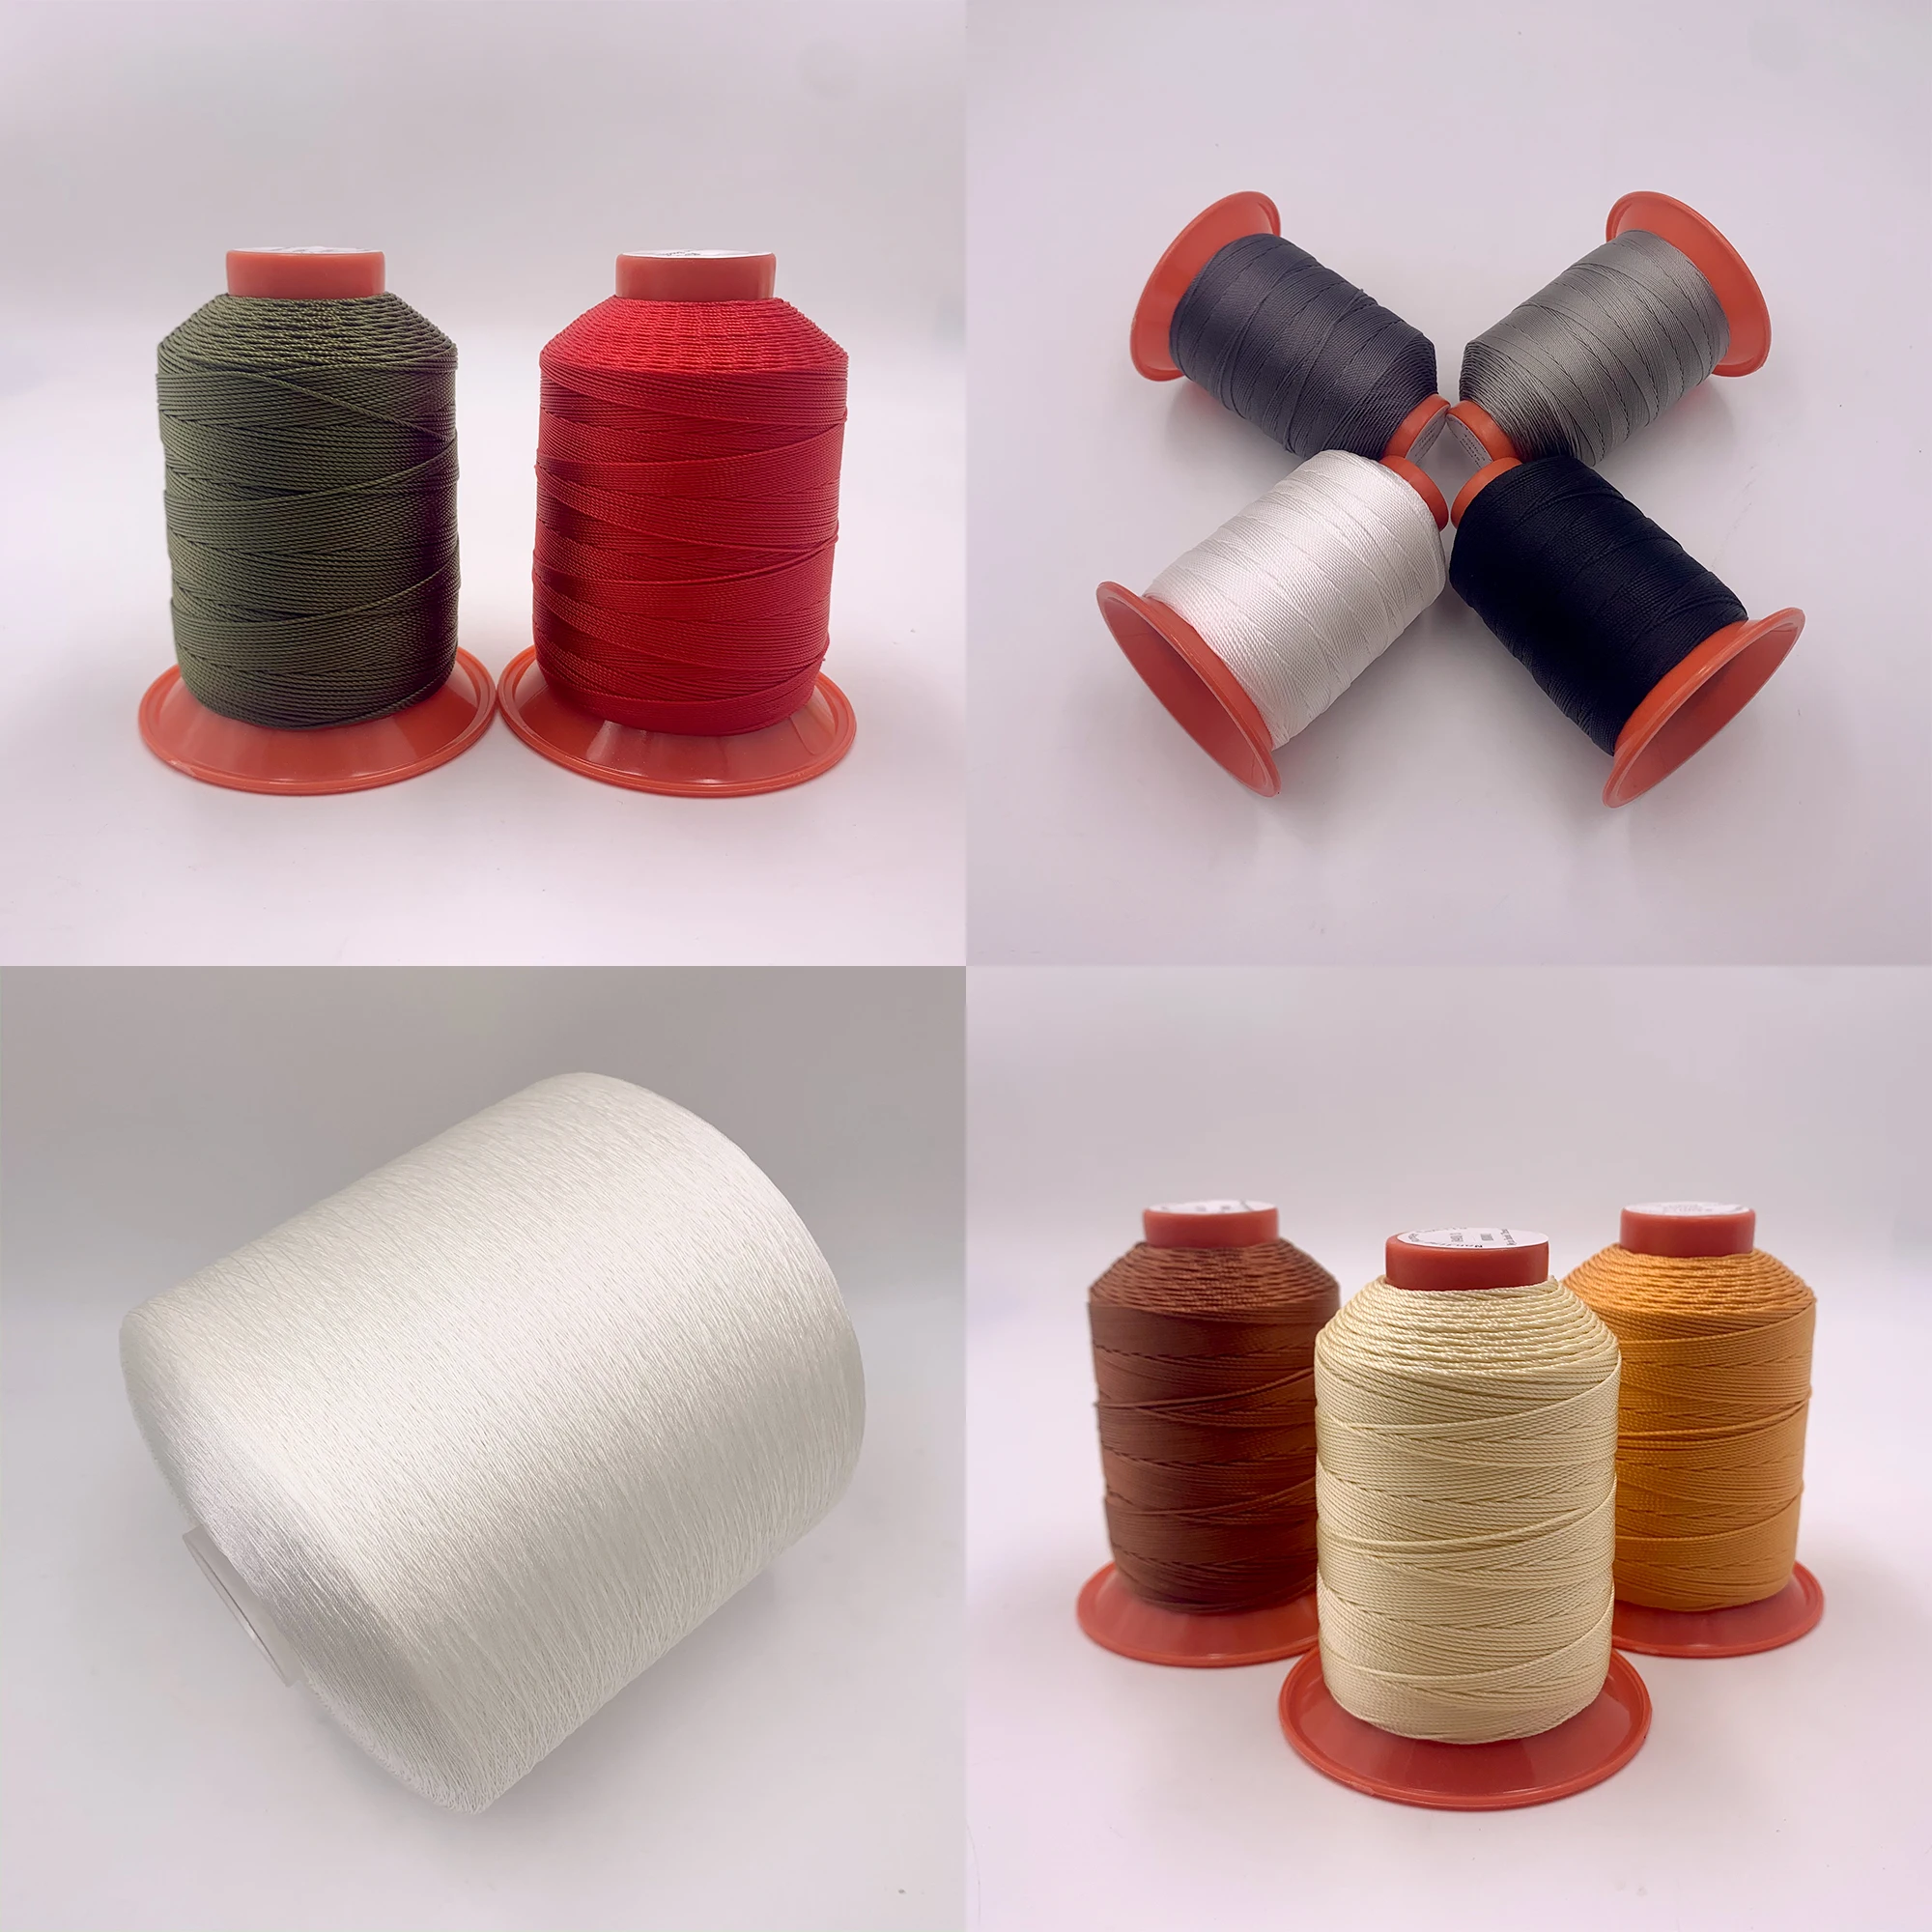 100% high quality nylon thread, bonded thread, low lead time with 10 stock colors and other customized colors